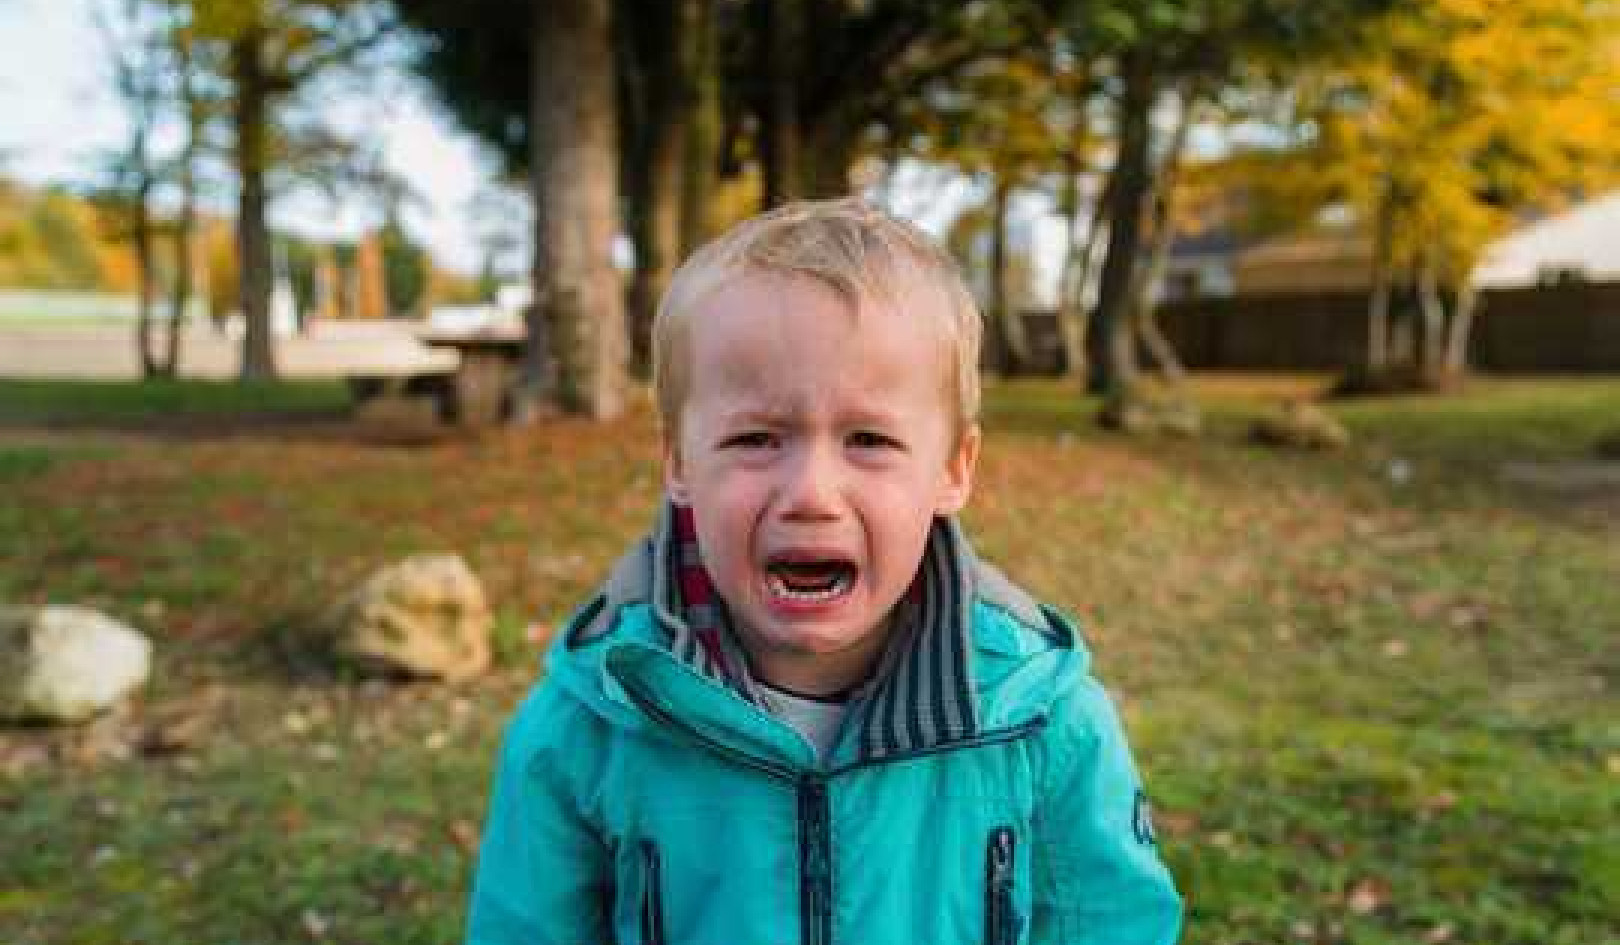 A Parent's Guide To Managing Tantrums